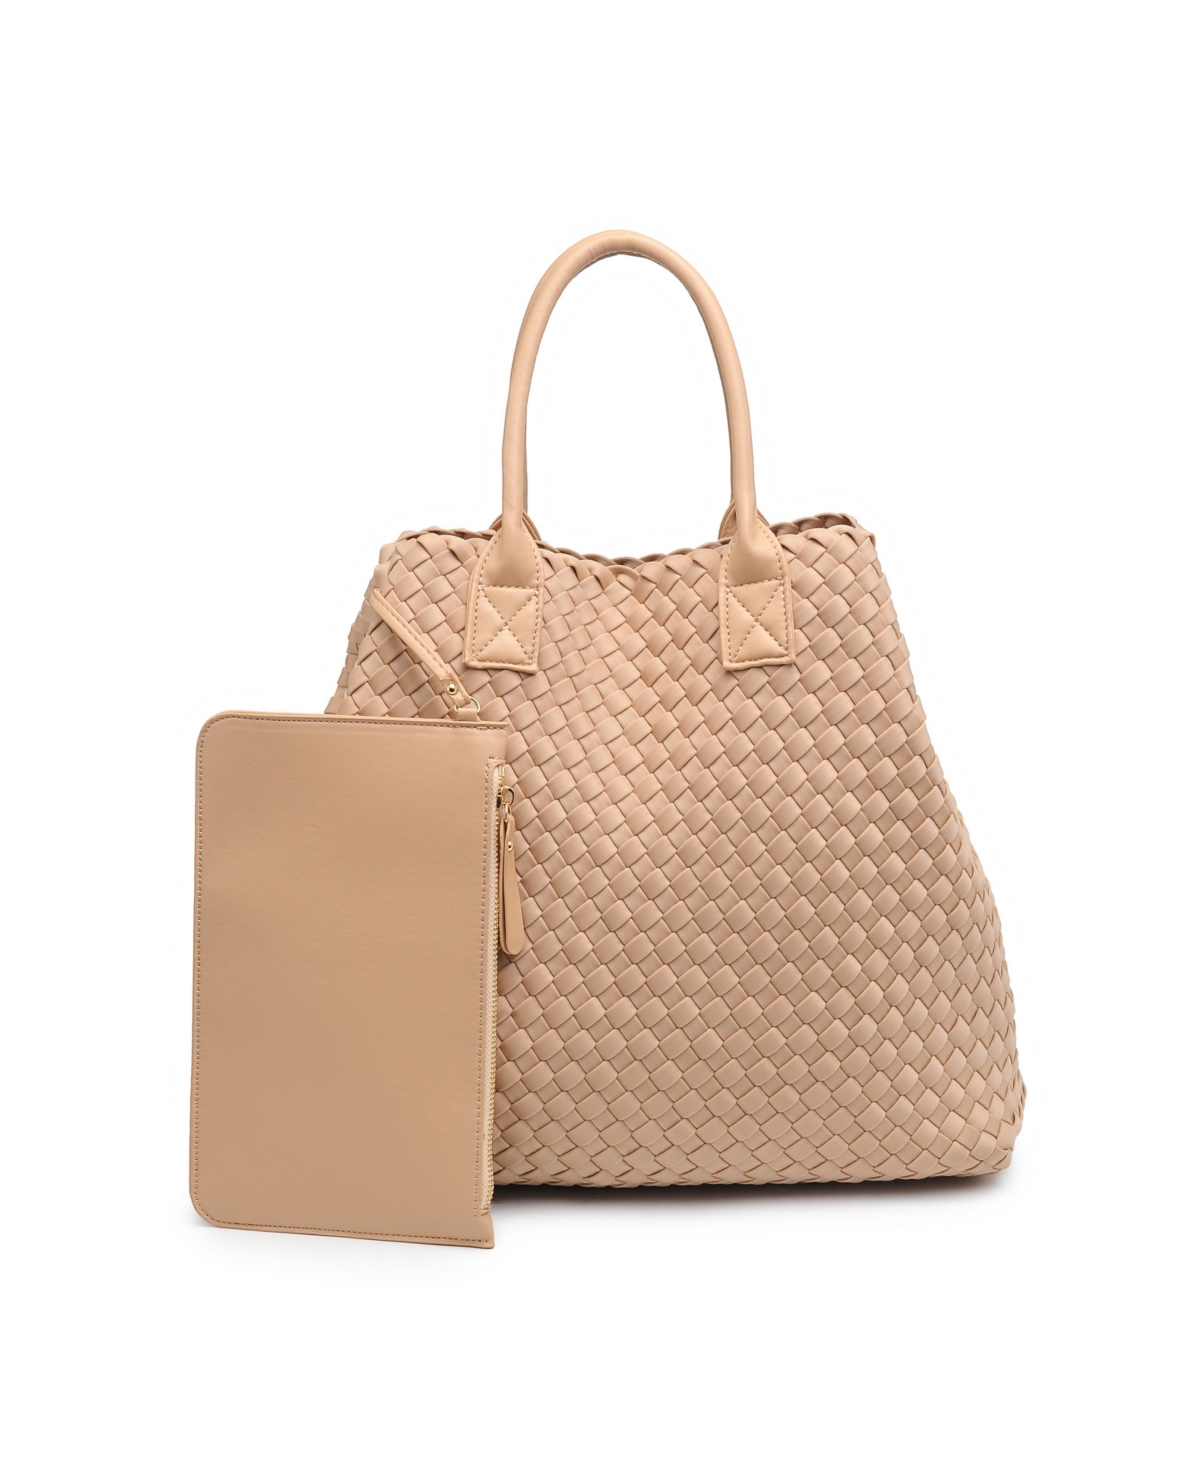 Urban Expressions Ithaca Woven Neoprene Tote In Natural